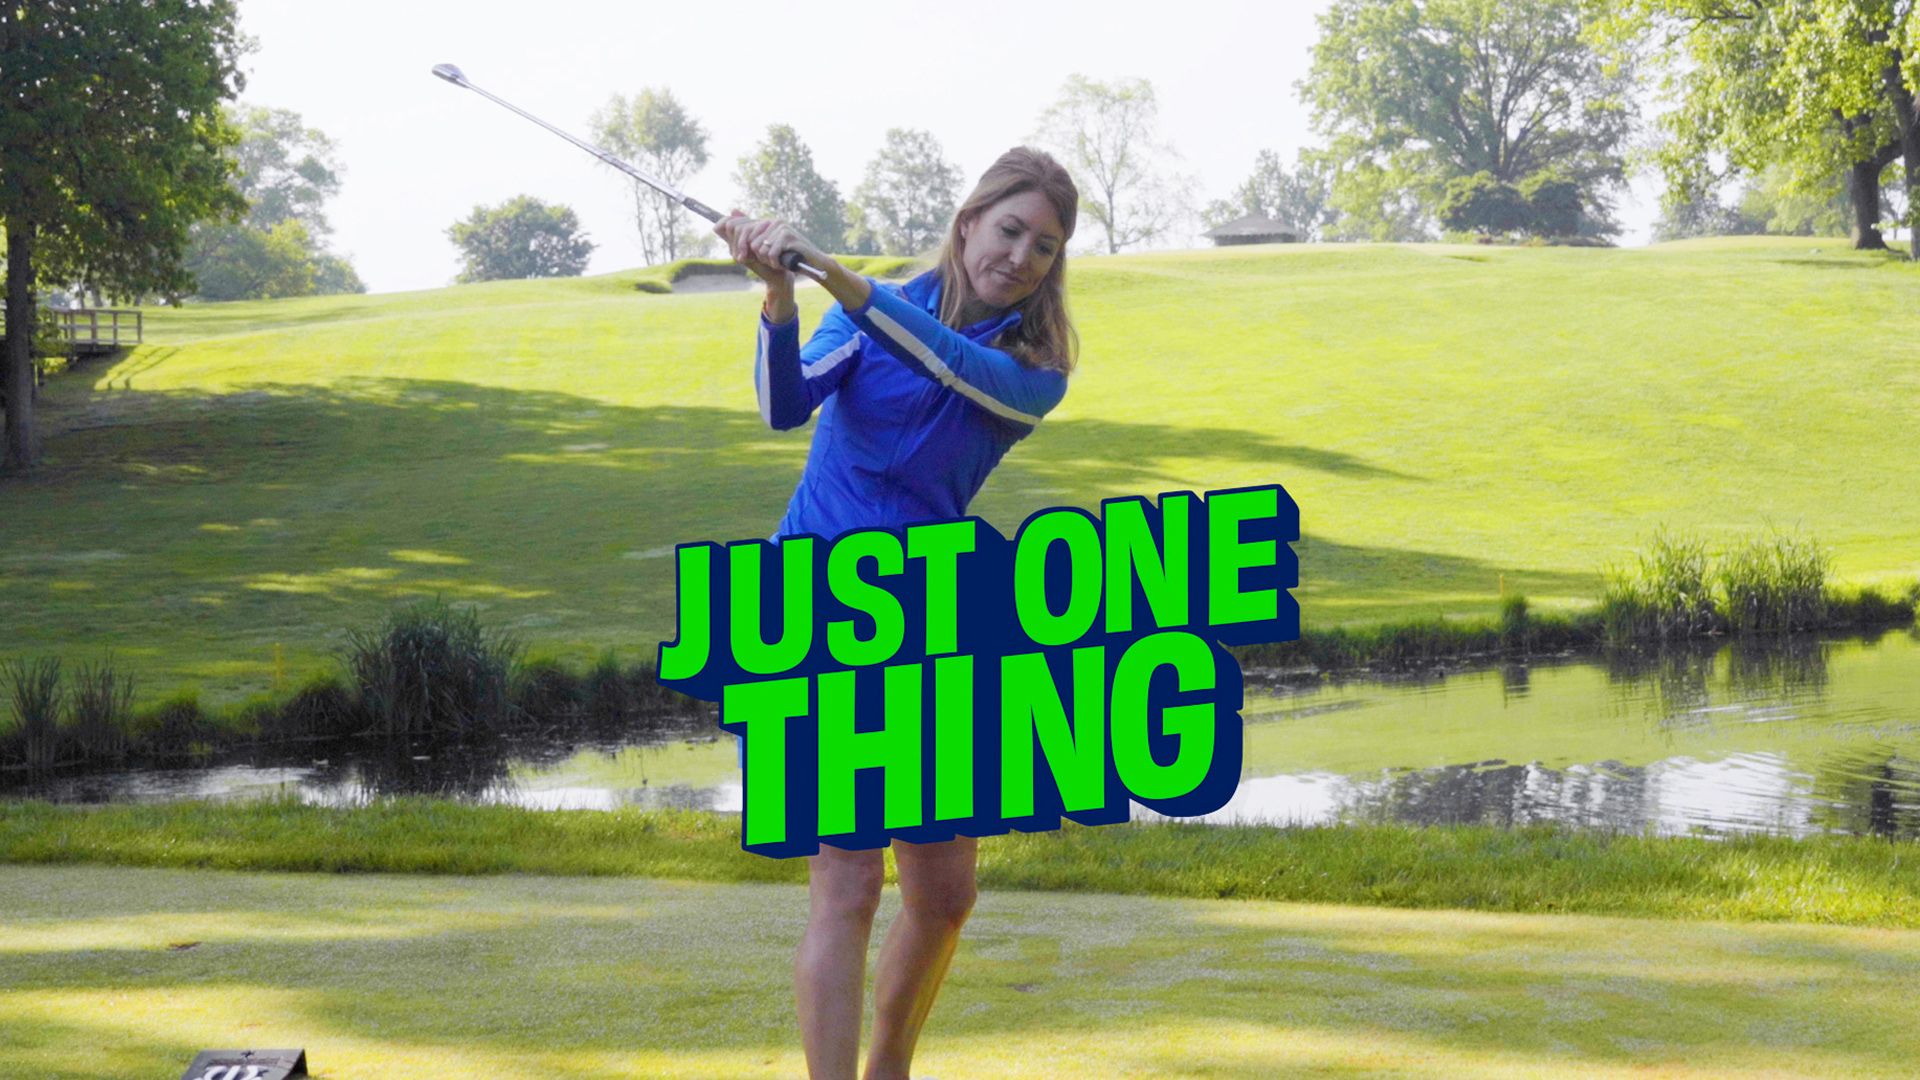 Using a tee in your grip can fix an over-the-top swing. Top 100 Teacher shows how